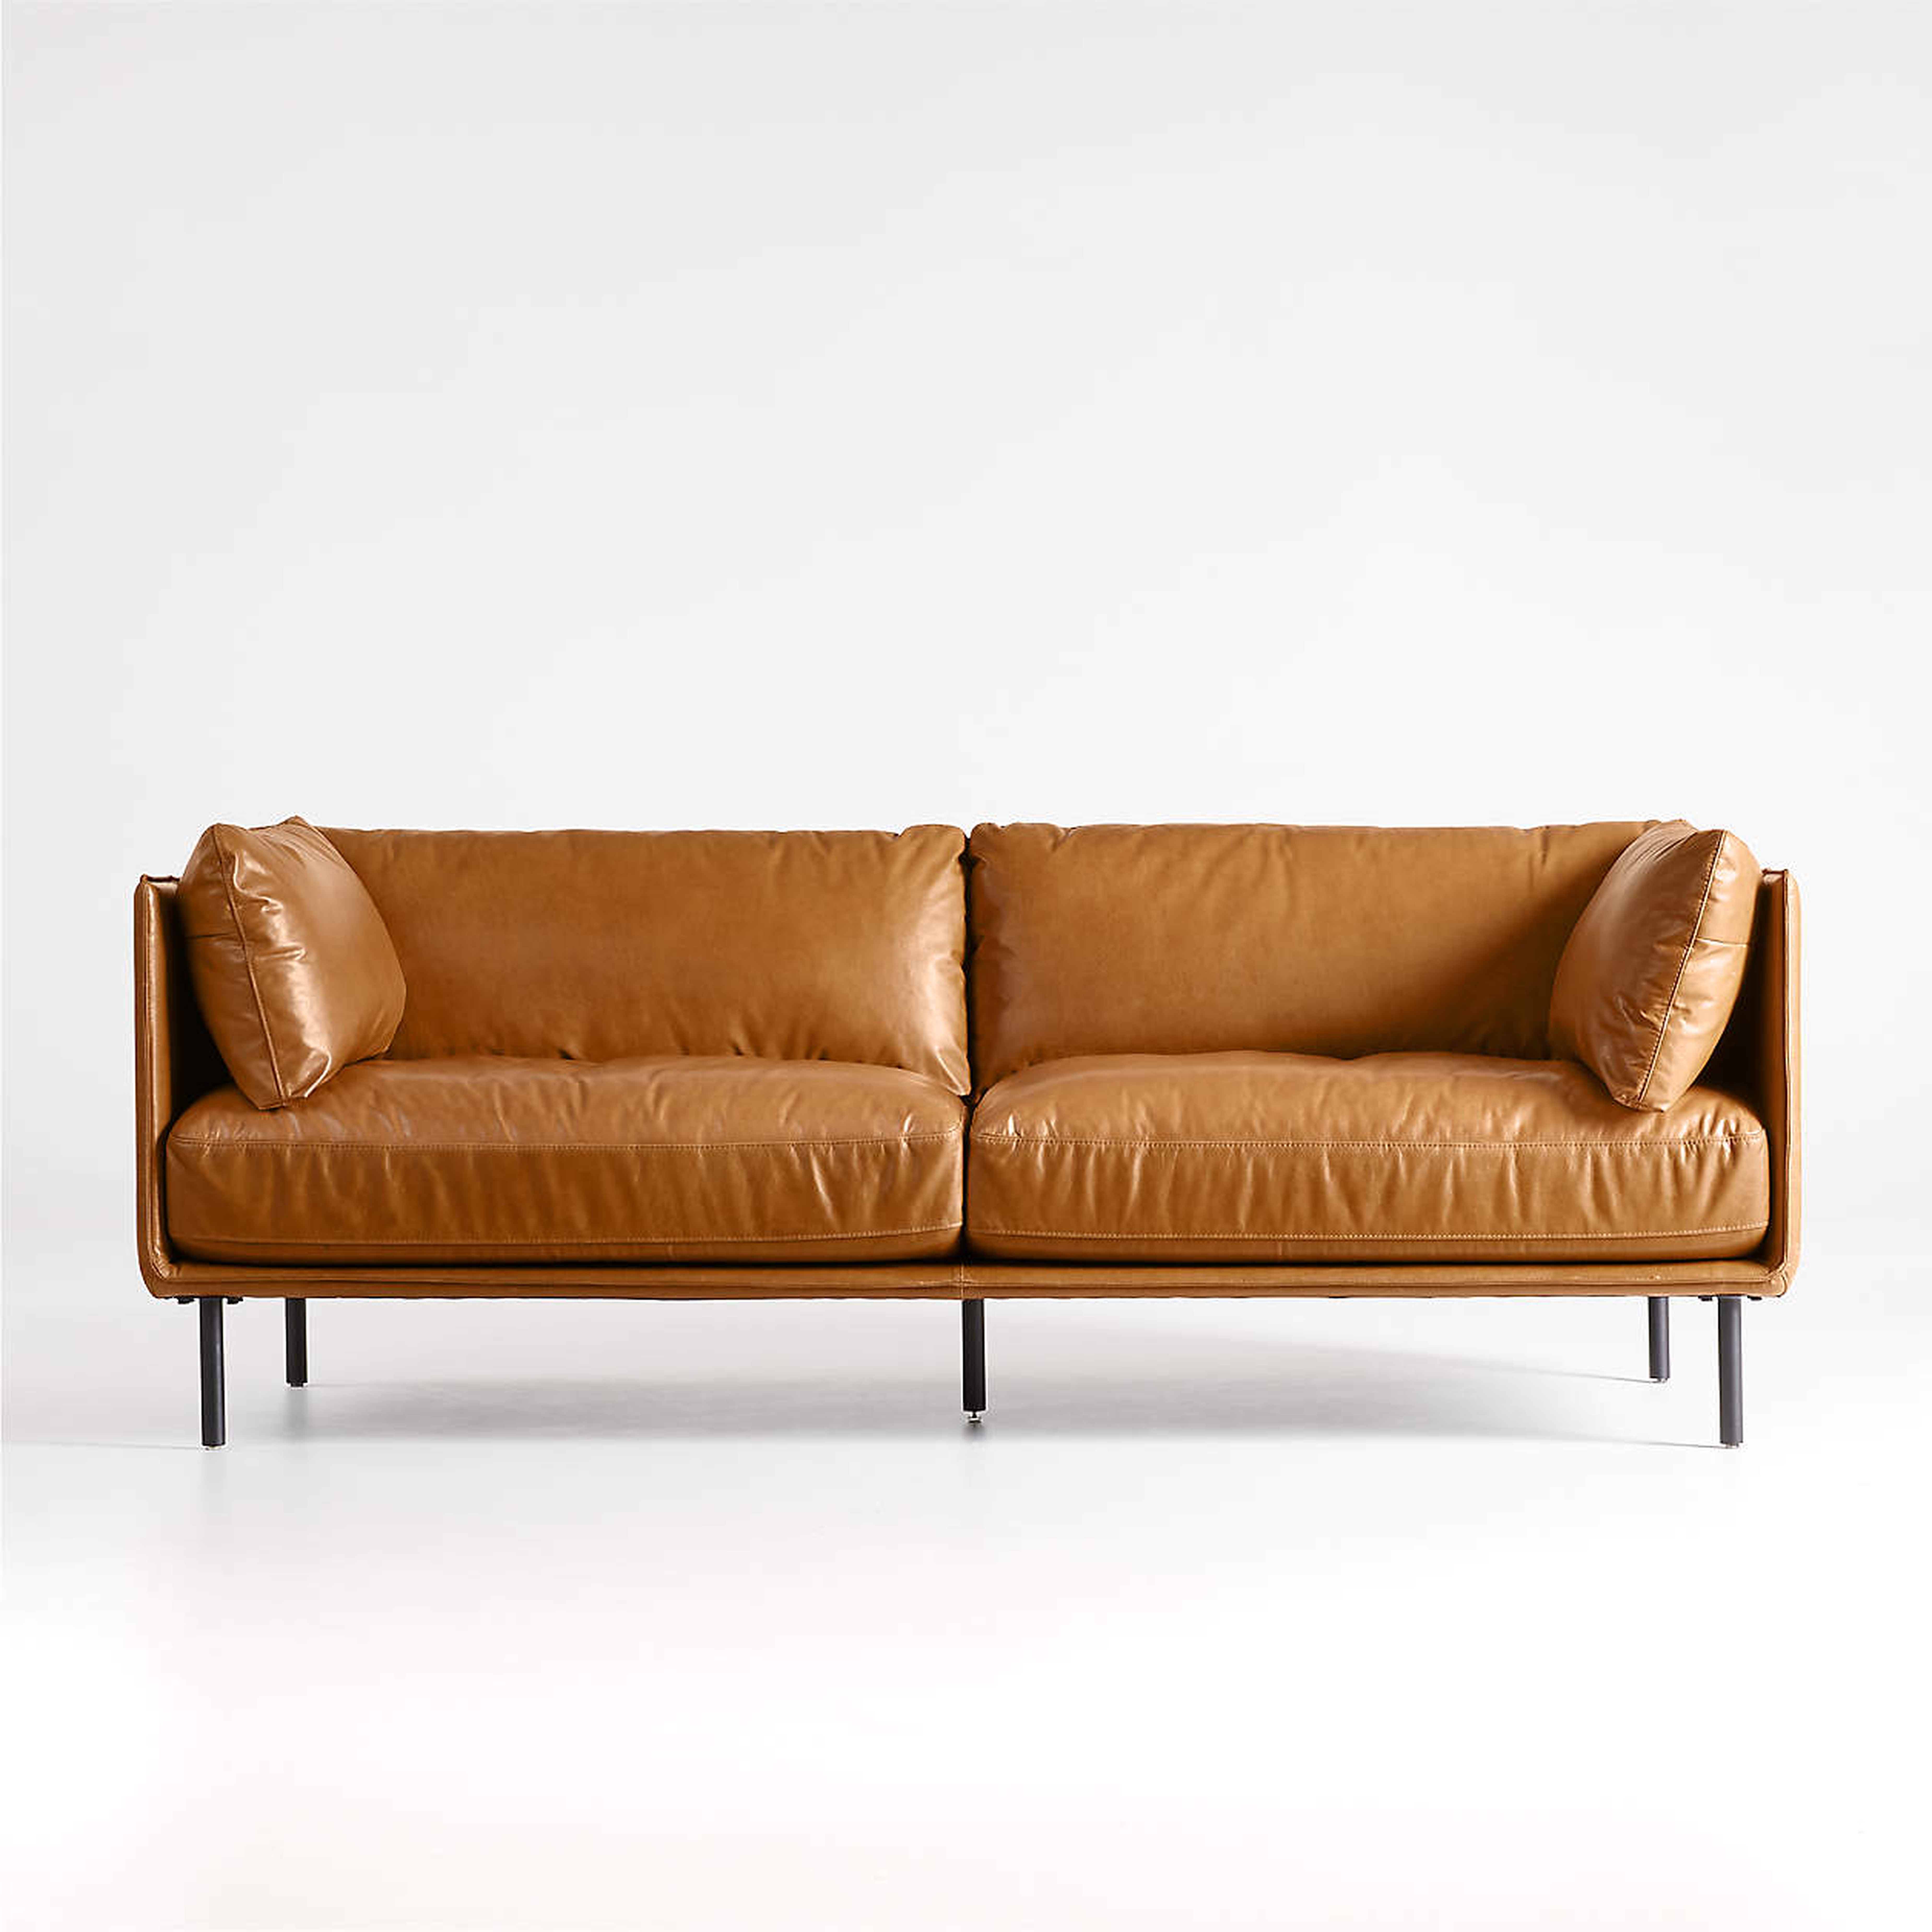 Wells Leather Sofa, Old Town Cayenne - Crate and Barrel